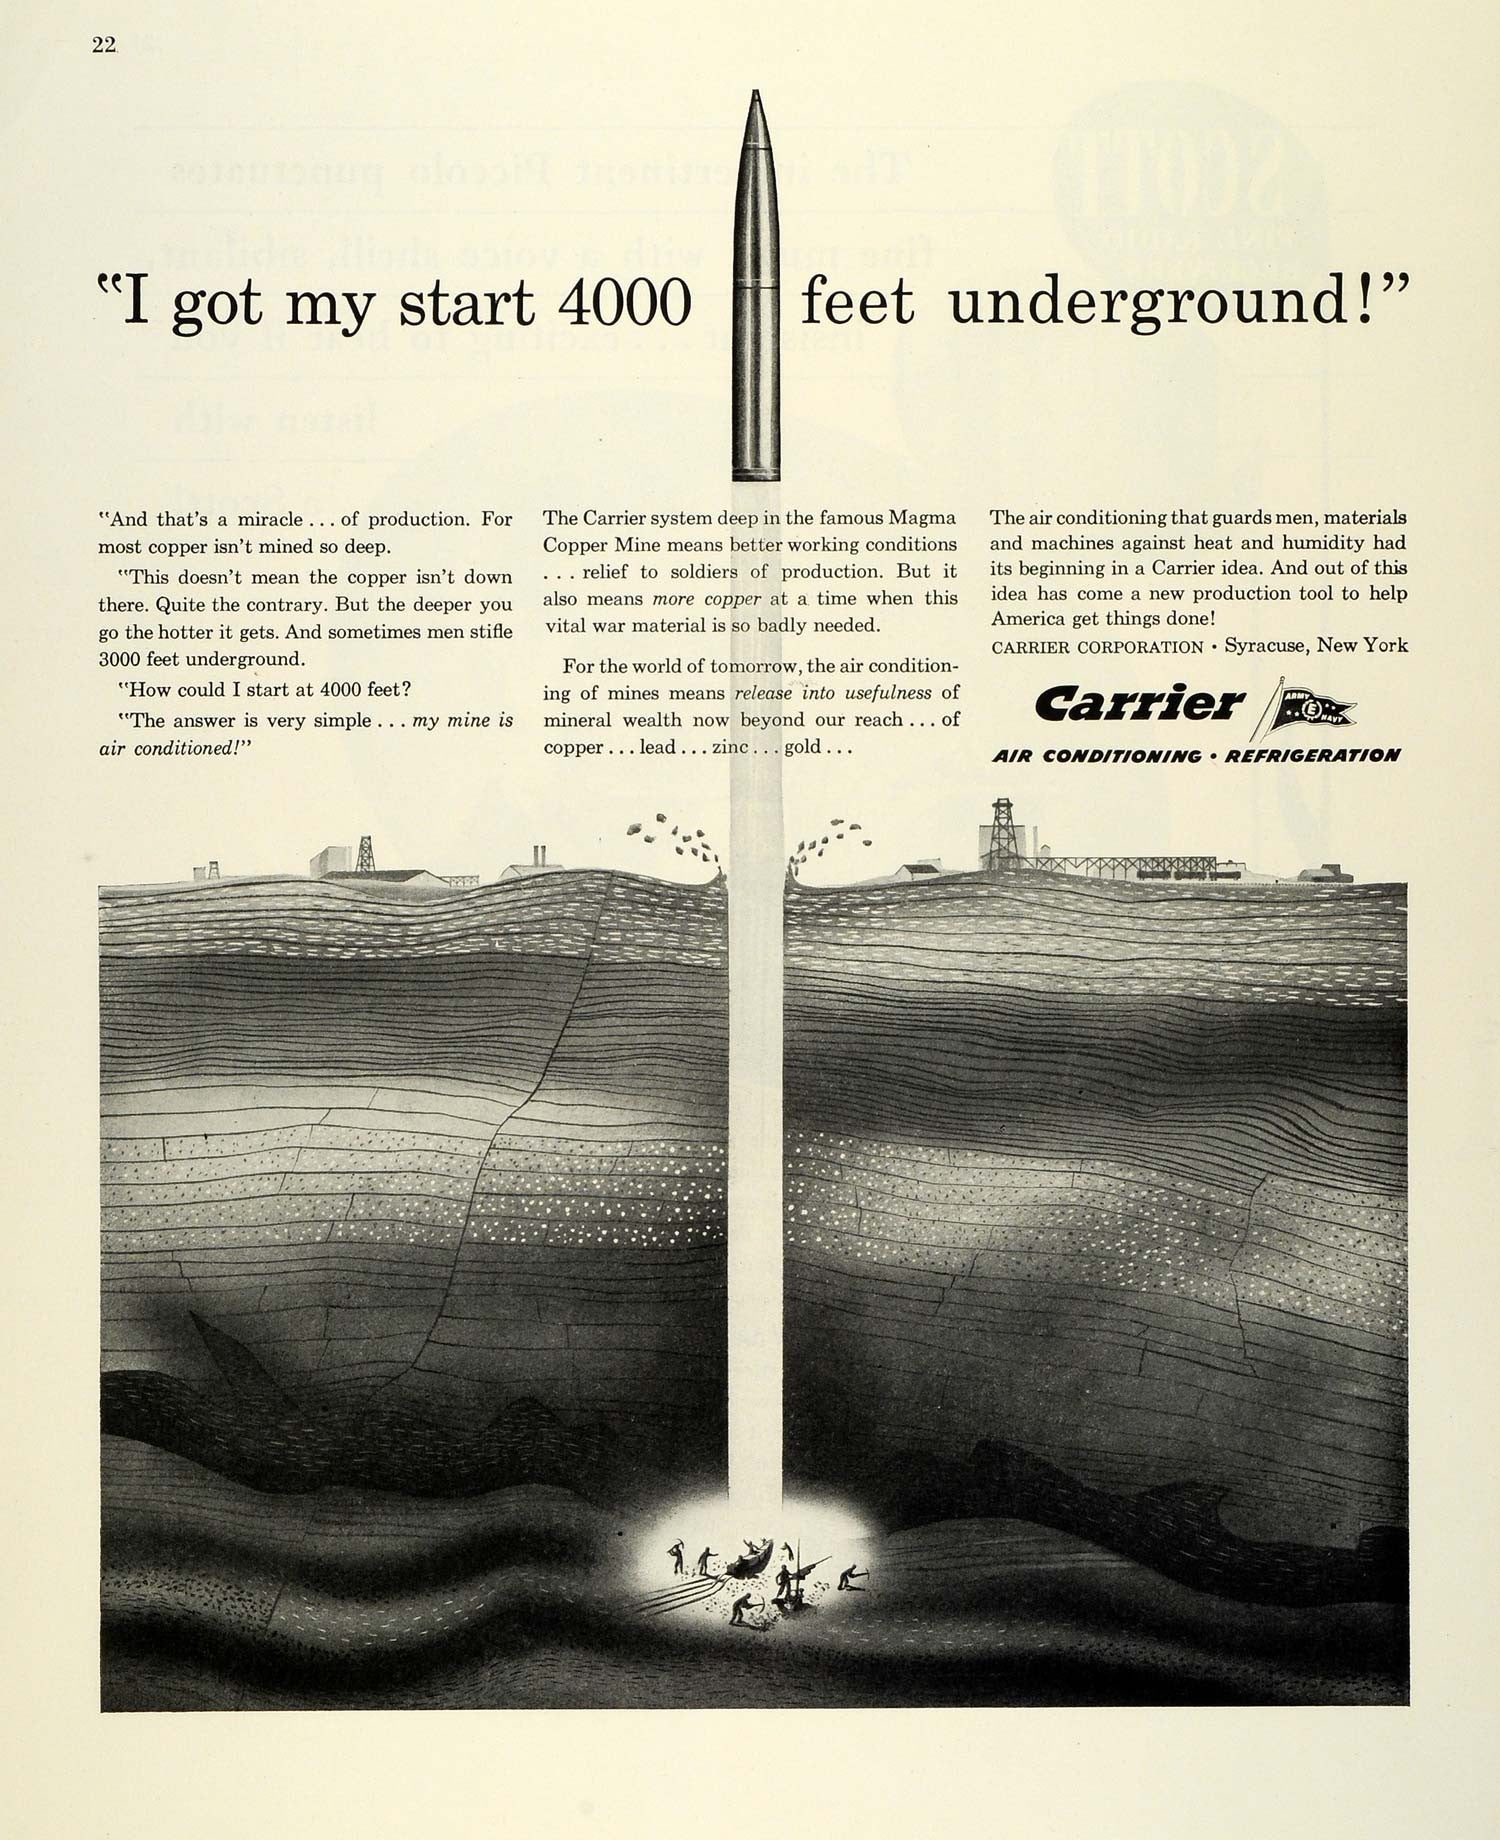 1944 Ad Carrier Air Conditioning Refrigeration WWII War Production Copper FZ6